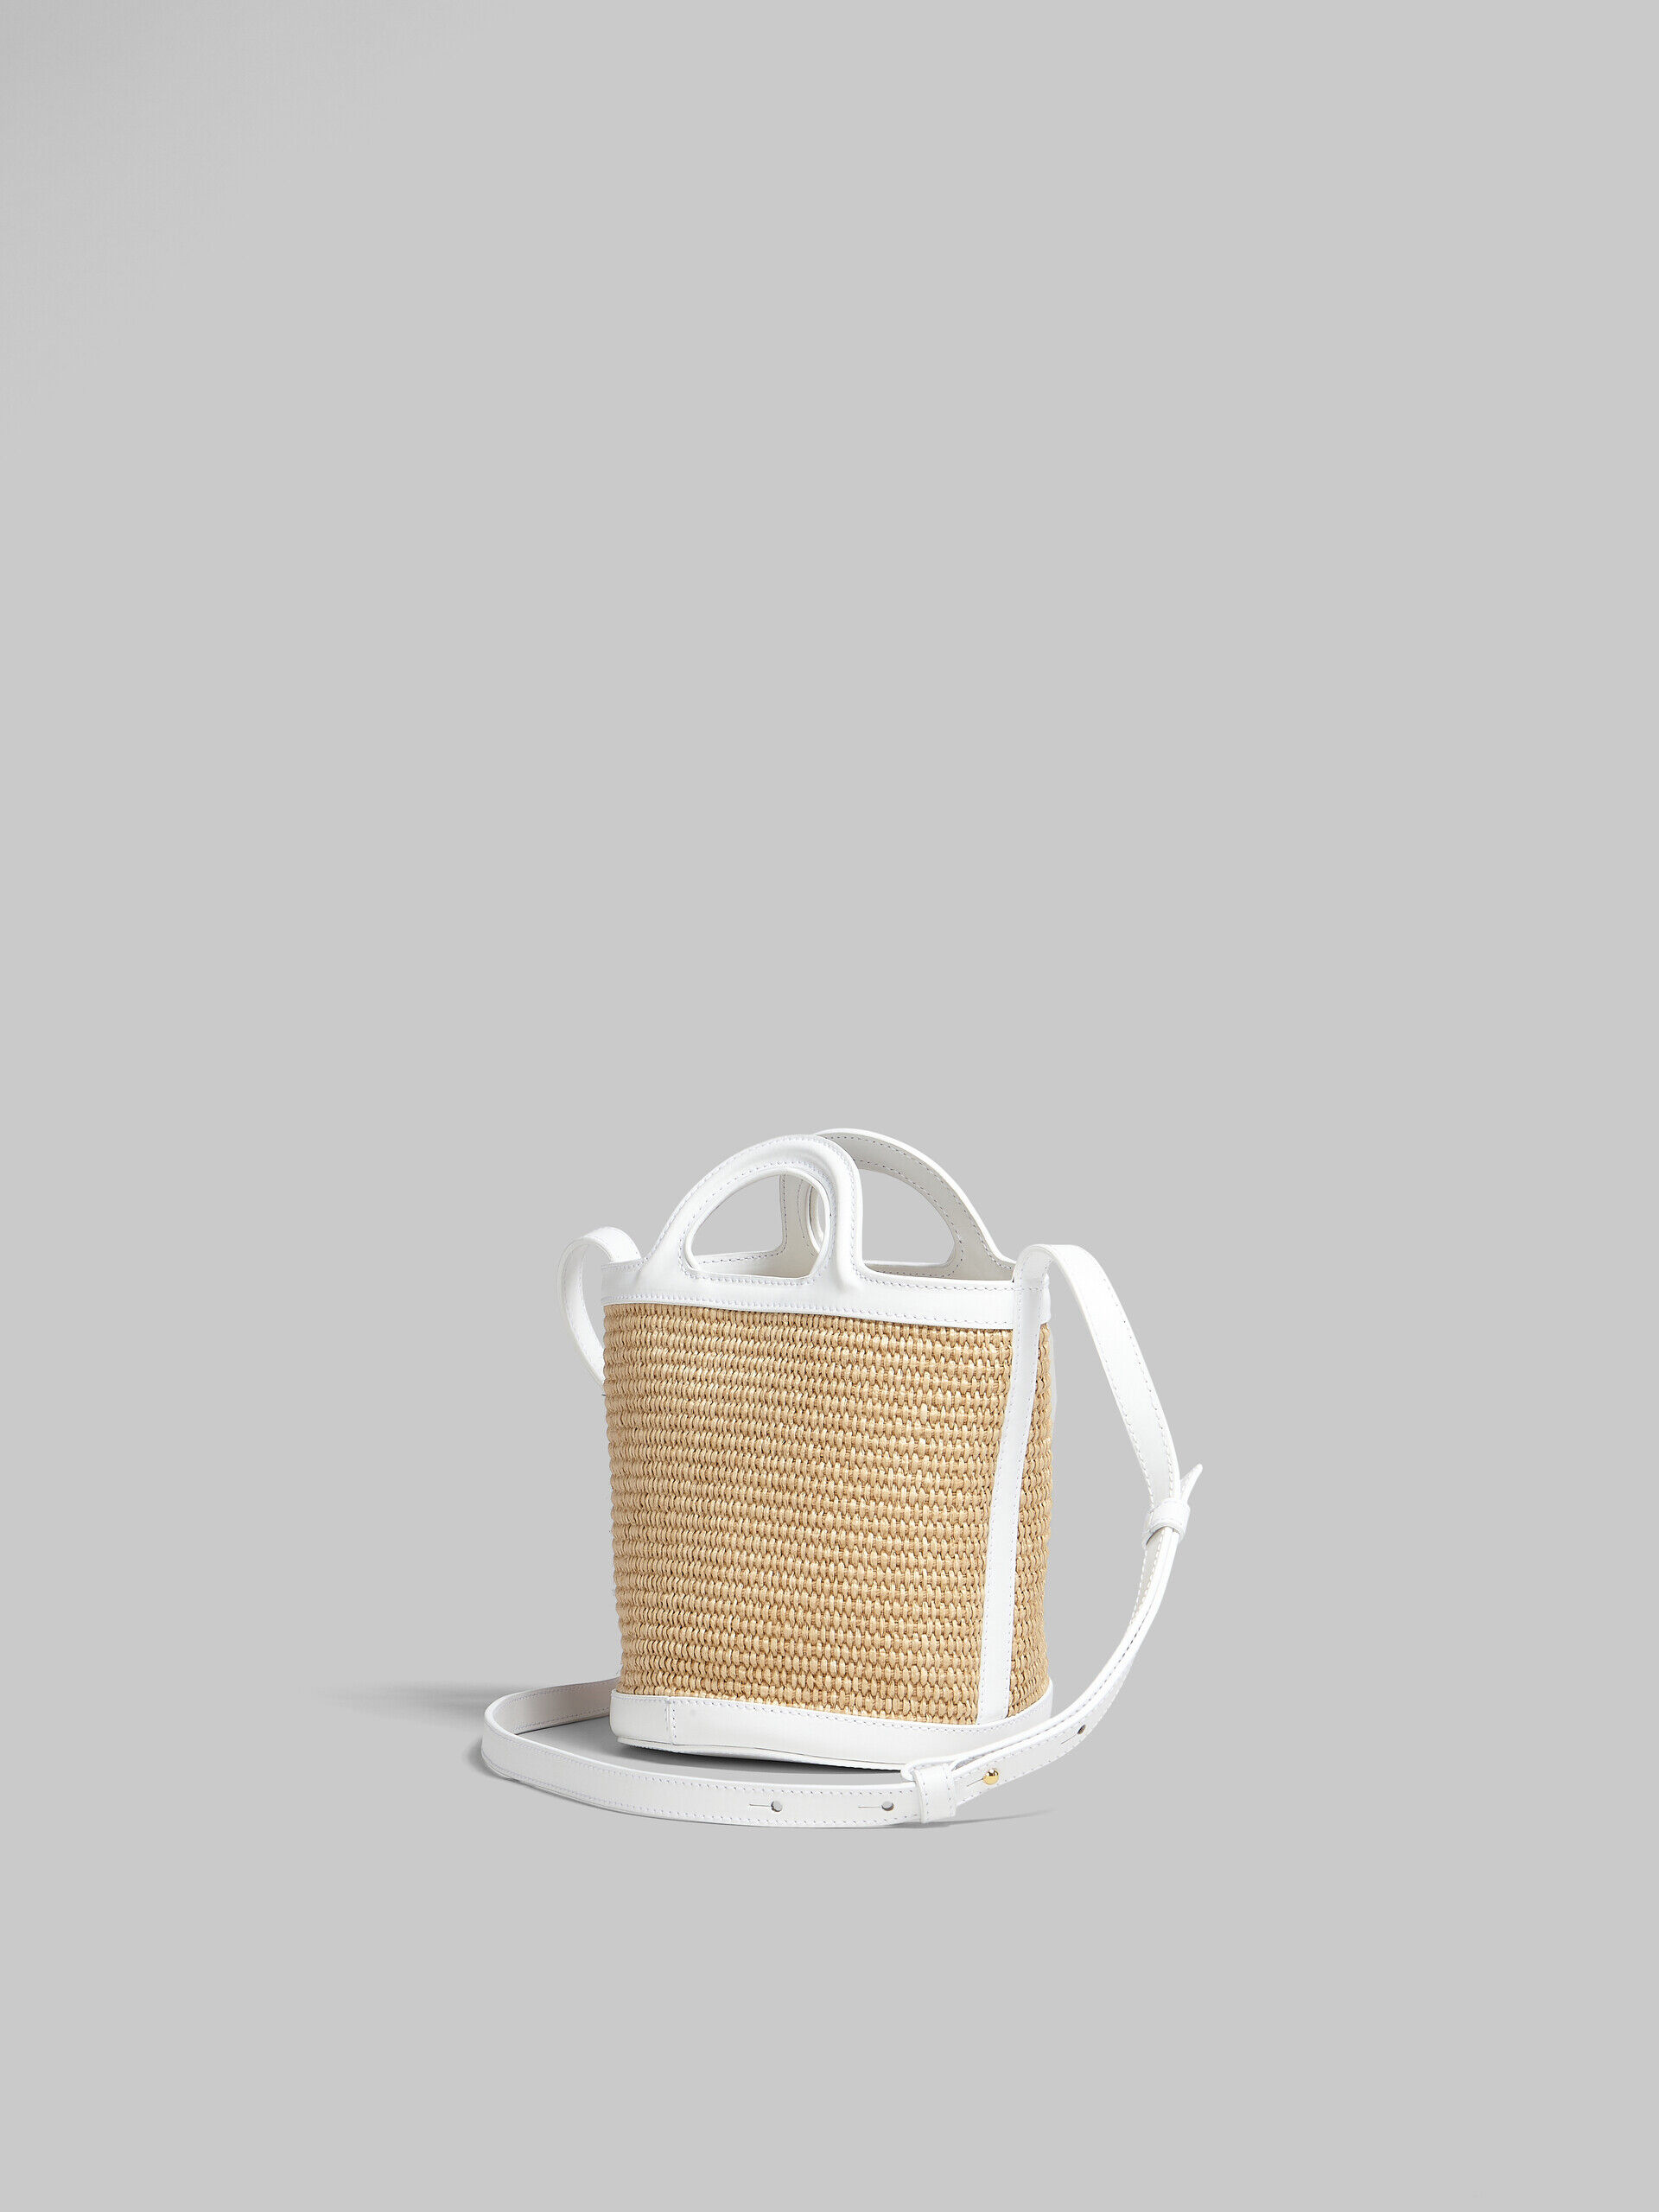 Tropicalia Small Bucket Bag in white leather and raffia-effect ...